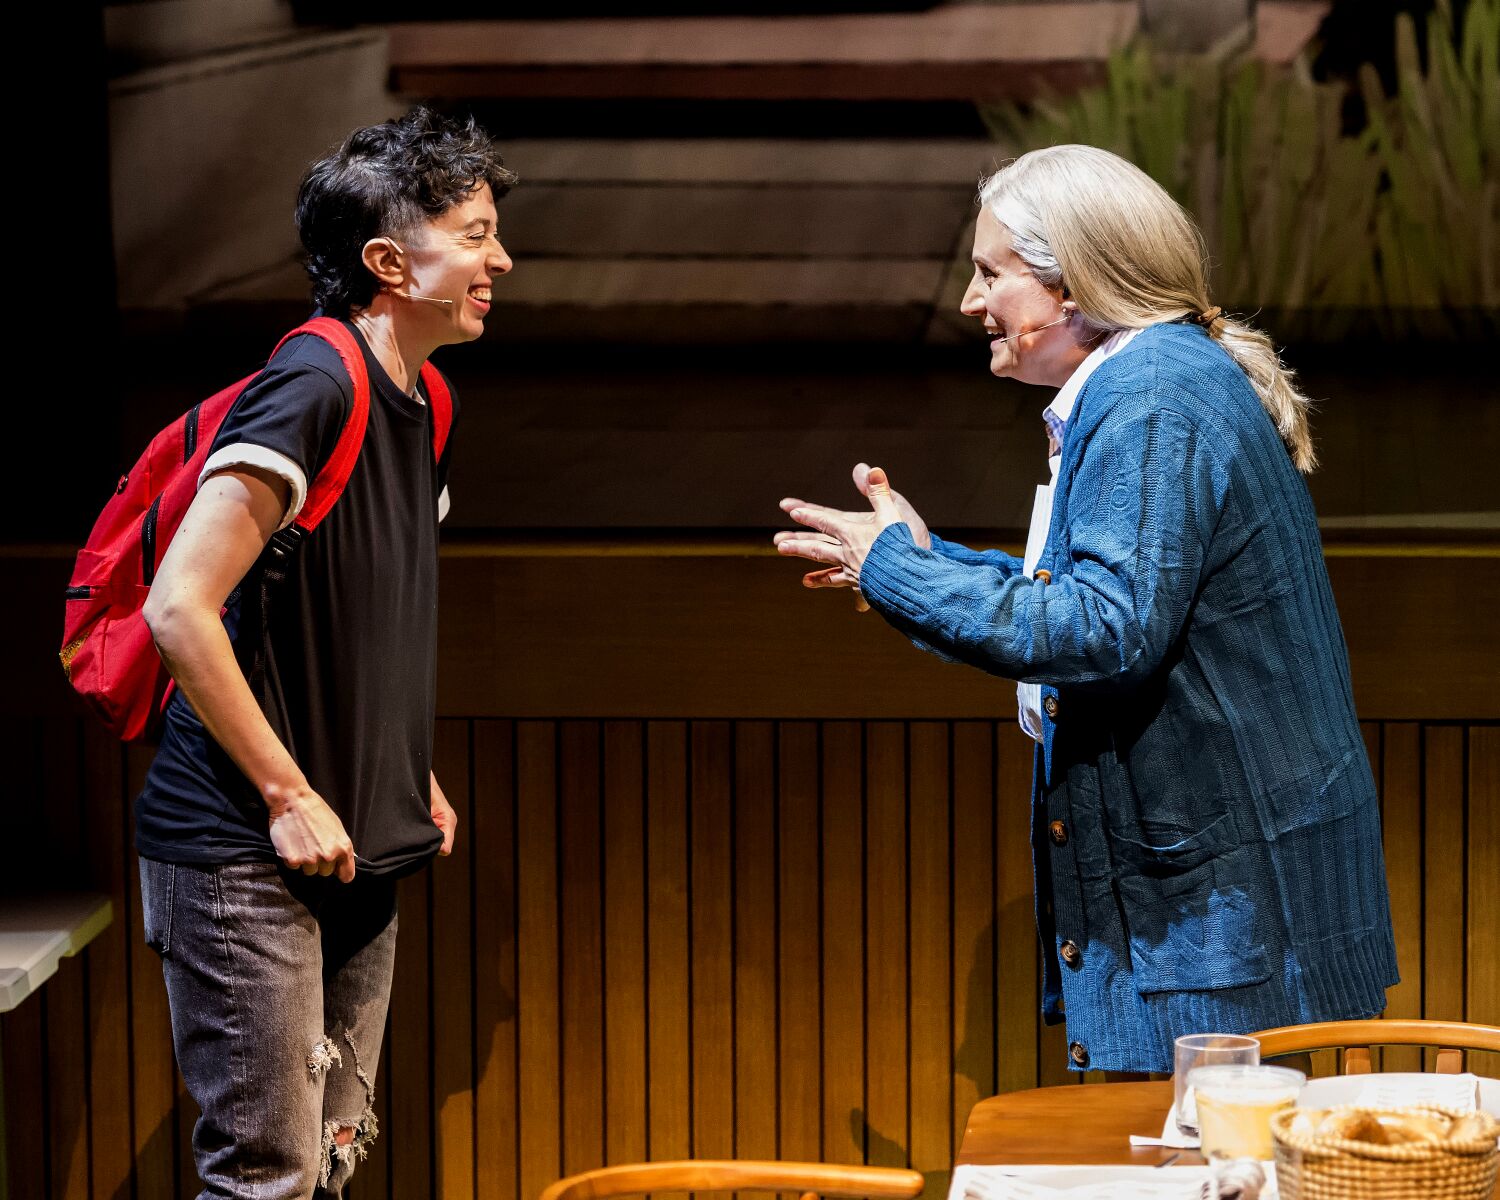 Review: A compassionate 'Transparent' musical is stymied by its chaotic production